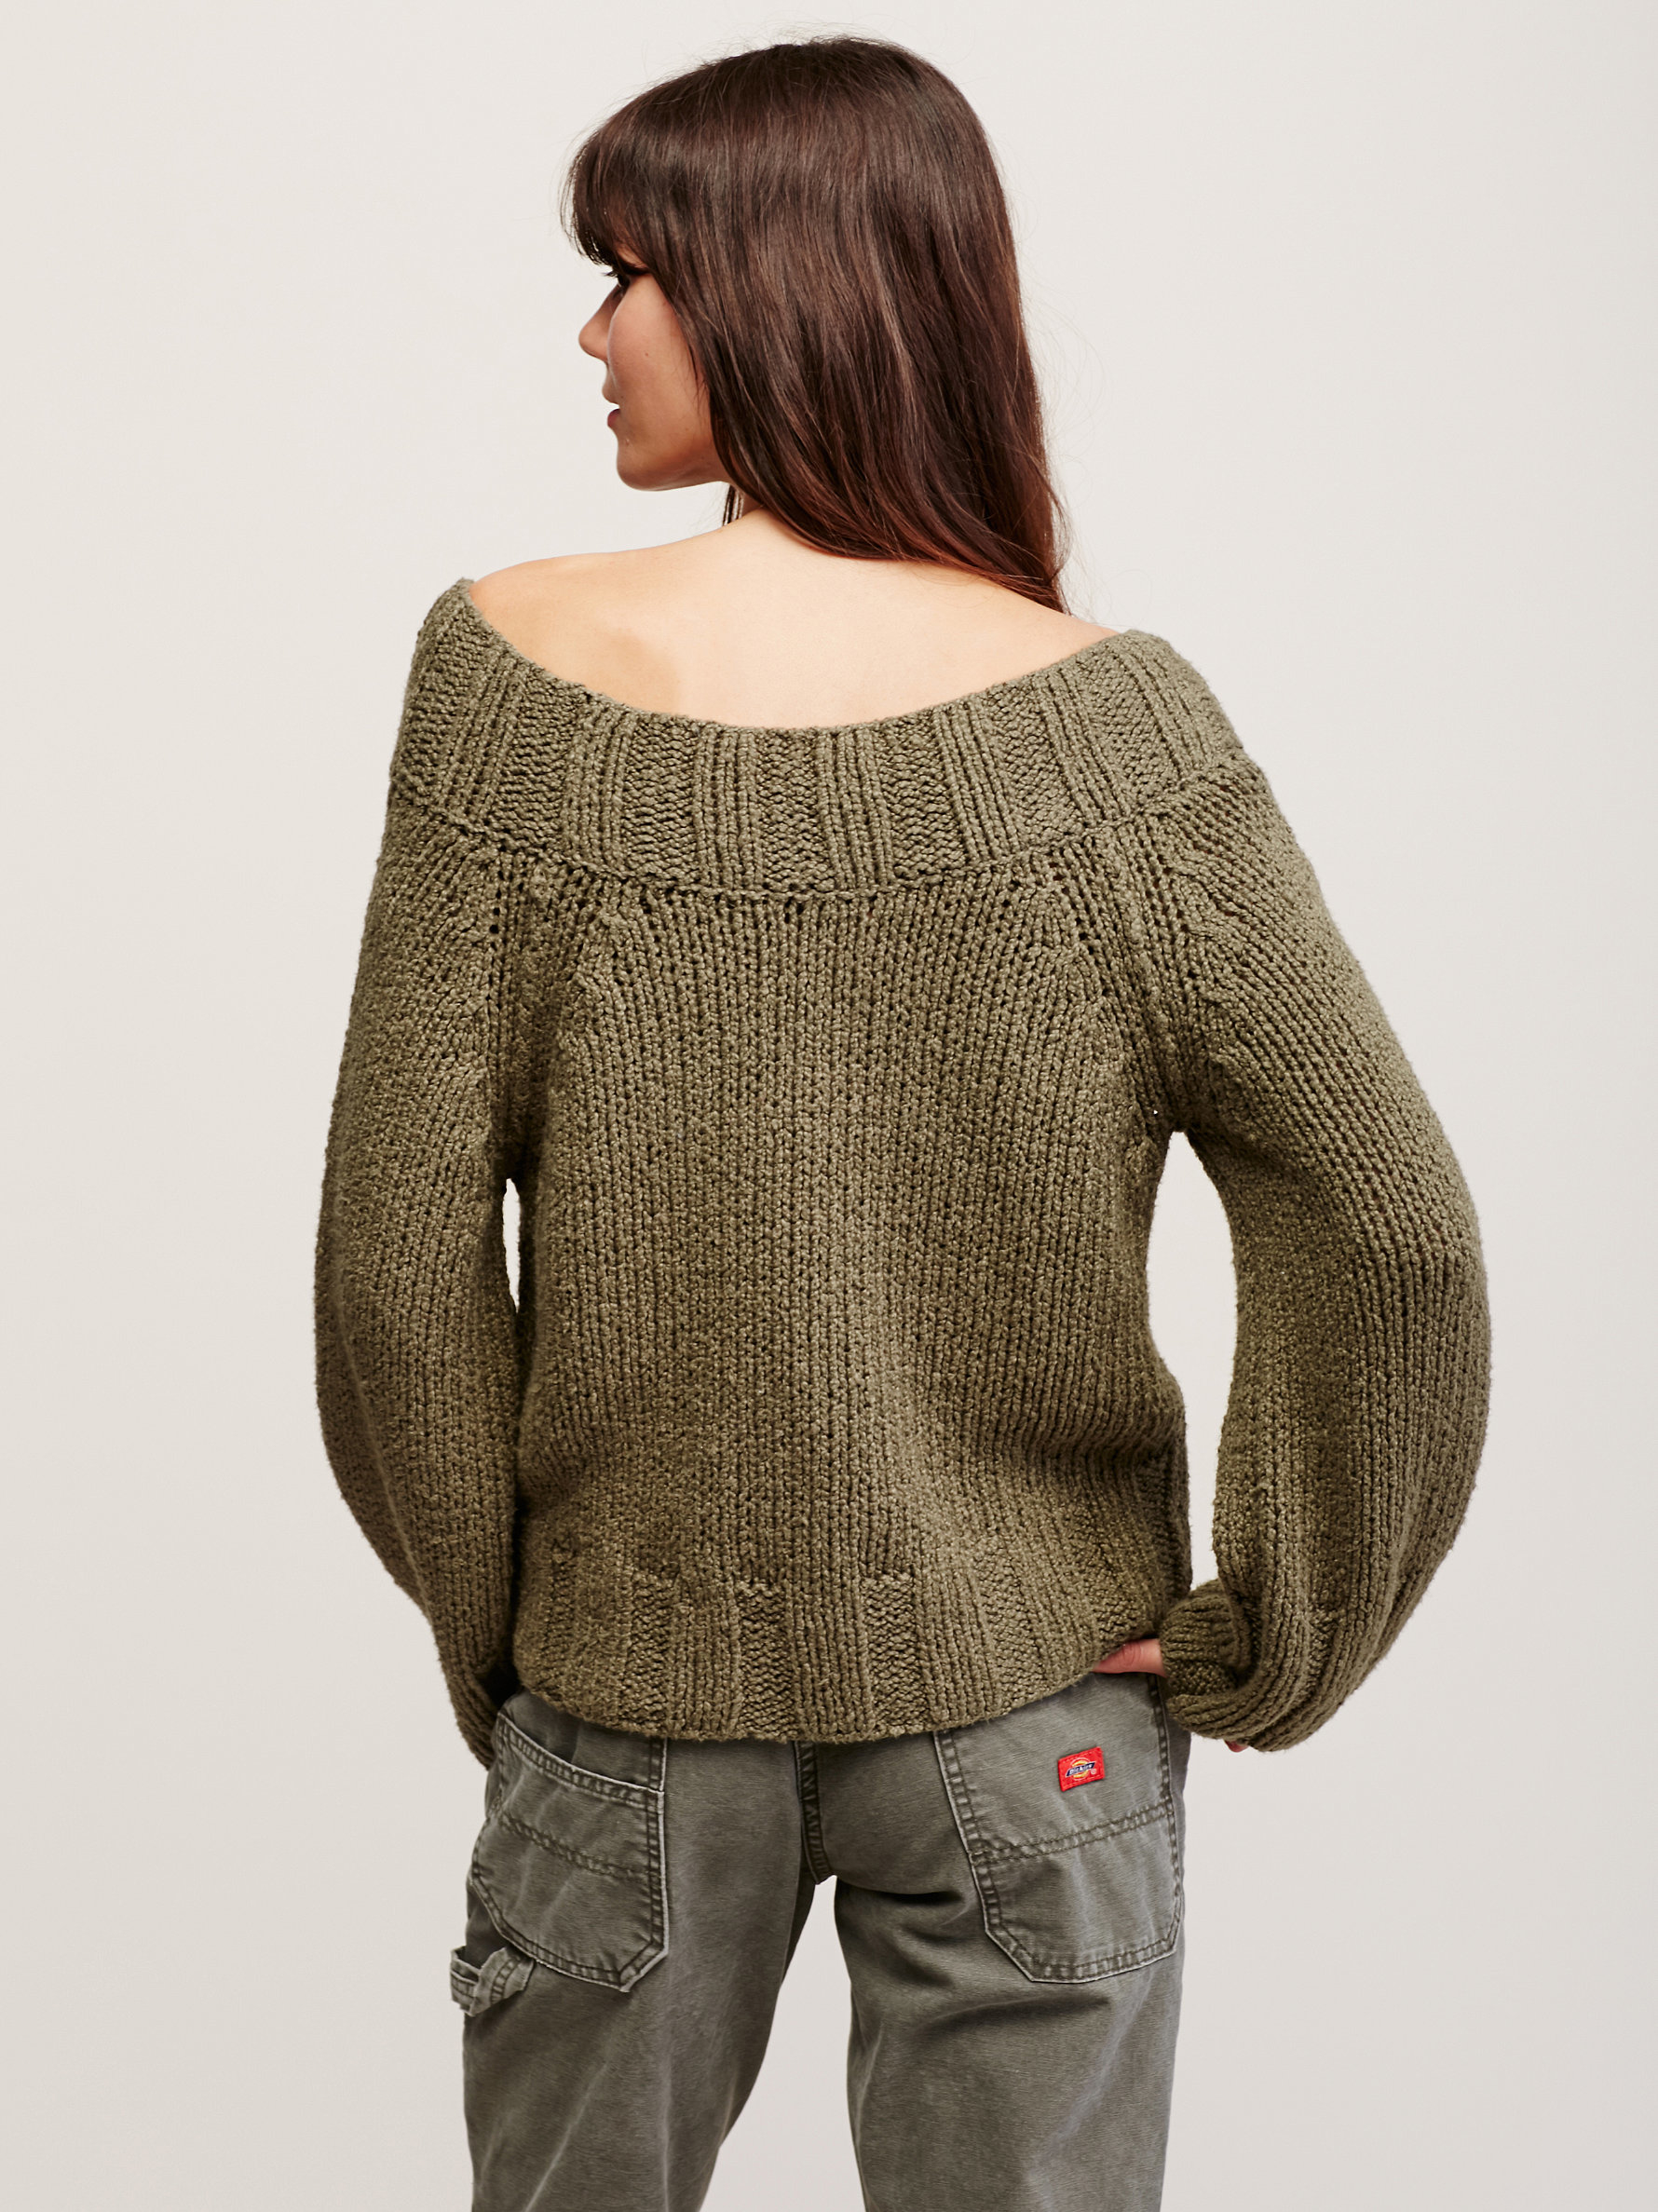 Free People Cotton Beachy Slouch Sweater in Olive (Green) - Lyst